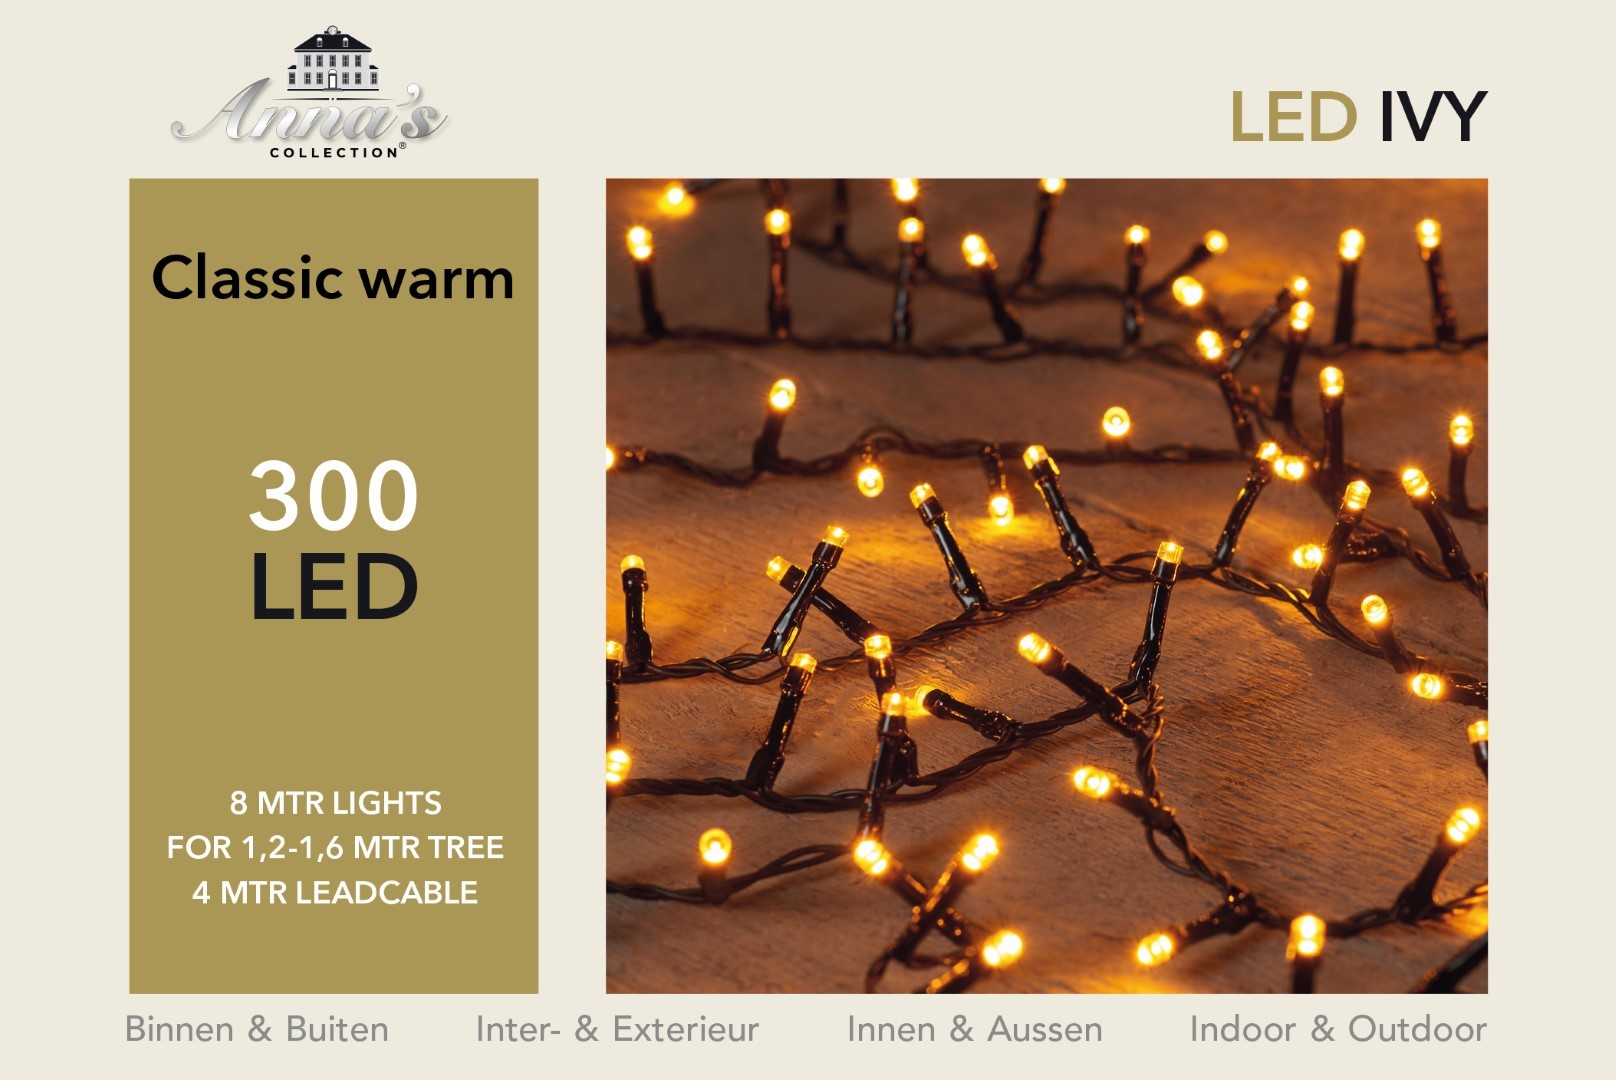 Led classic ivy 300l/8m 4m aanloopsnoer zwart/ip44 Anna's collection - Anna's Collection